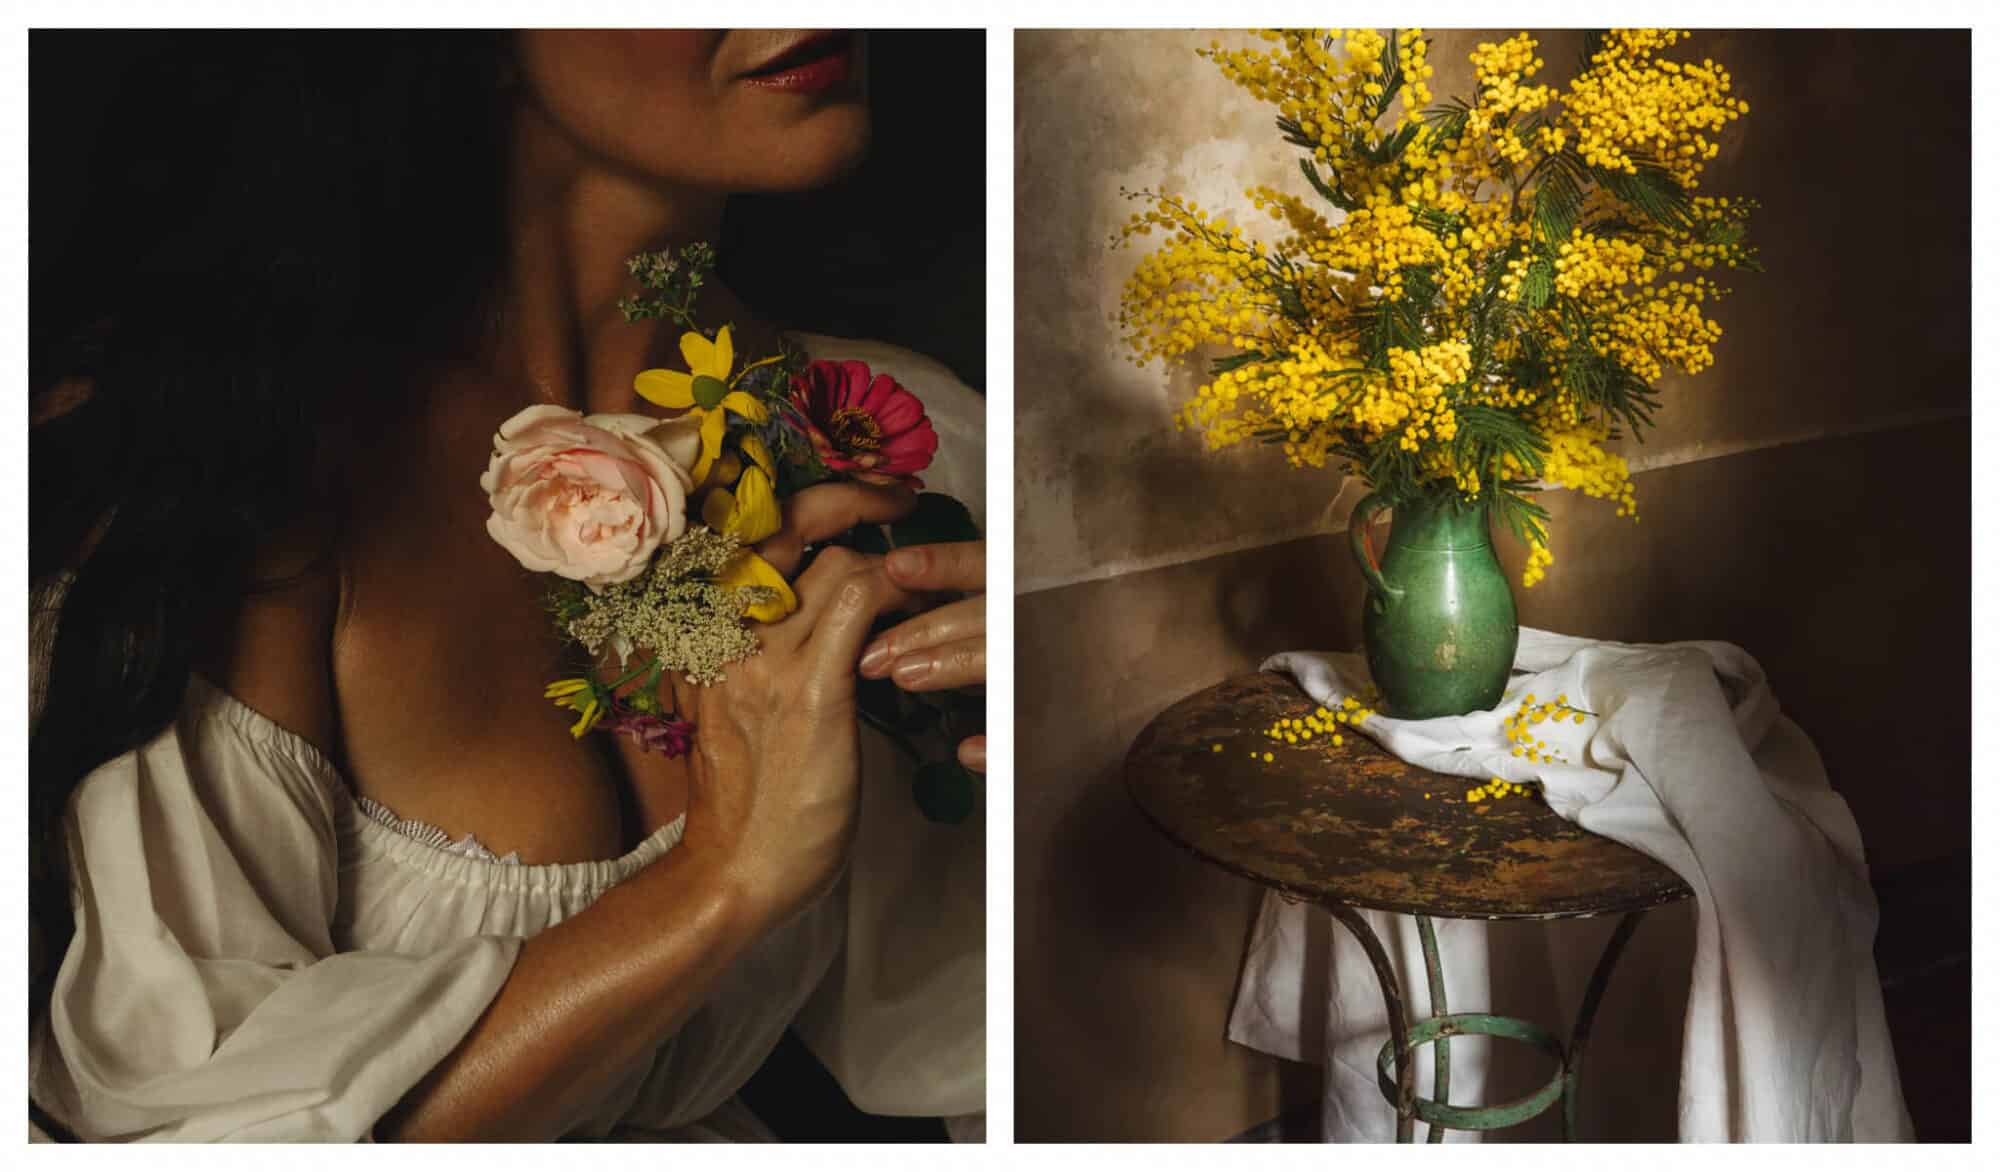 Left: Jamie Beck's self-portrait photgraph with yellow flowers and roses, Right: yellow mimosas places on a wooden table